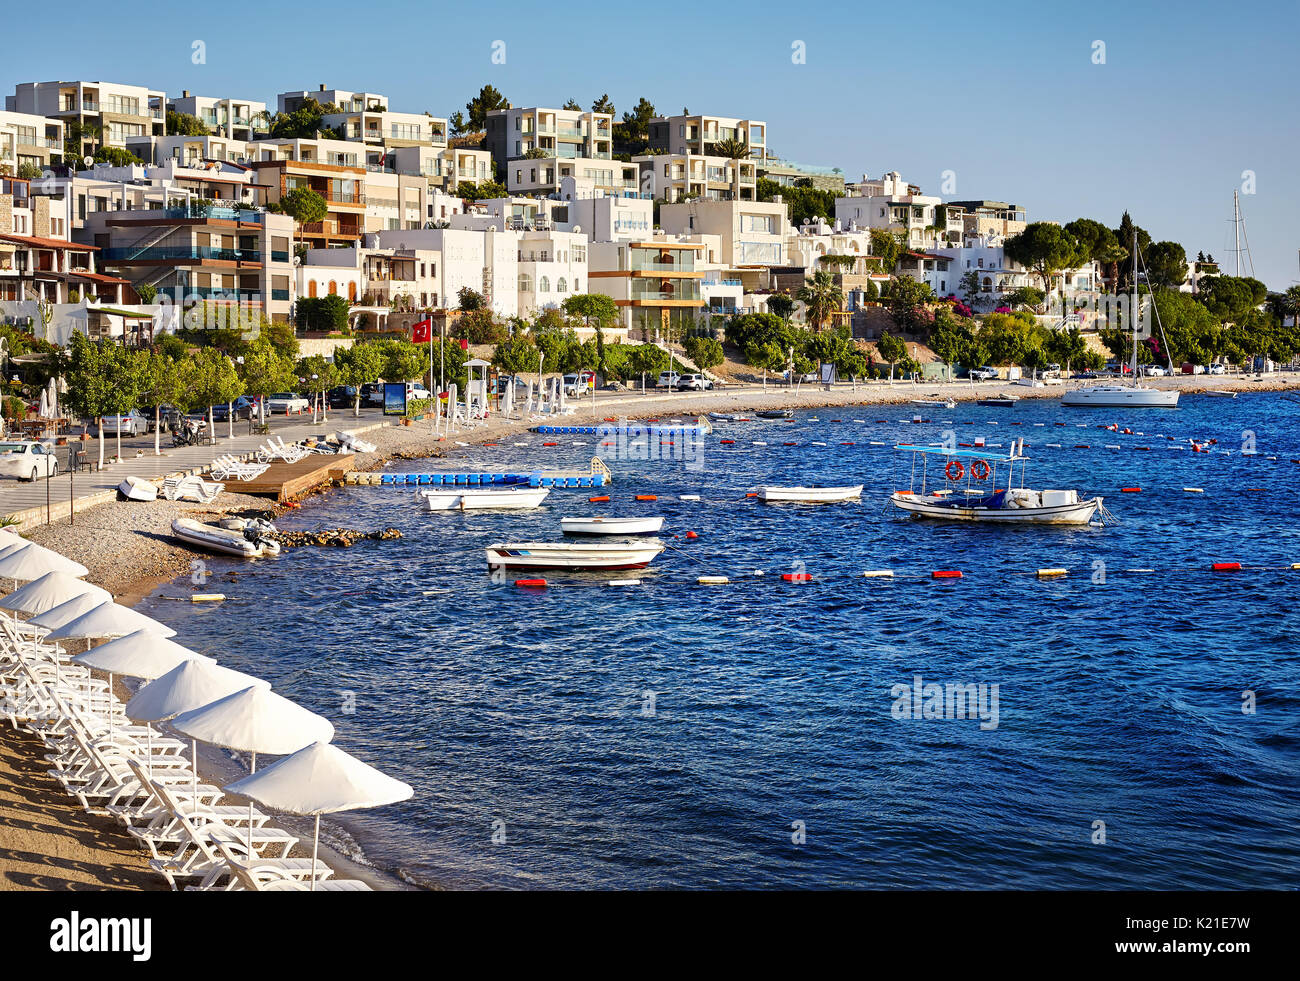 Hotels and White Umbrellas near lagoon with boats on the beach in Bodrum, Turkey Stock Photo